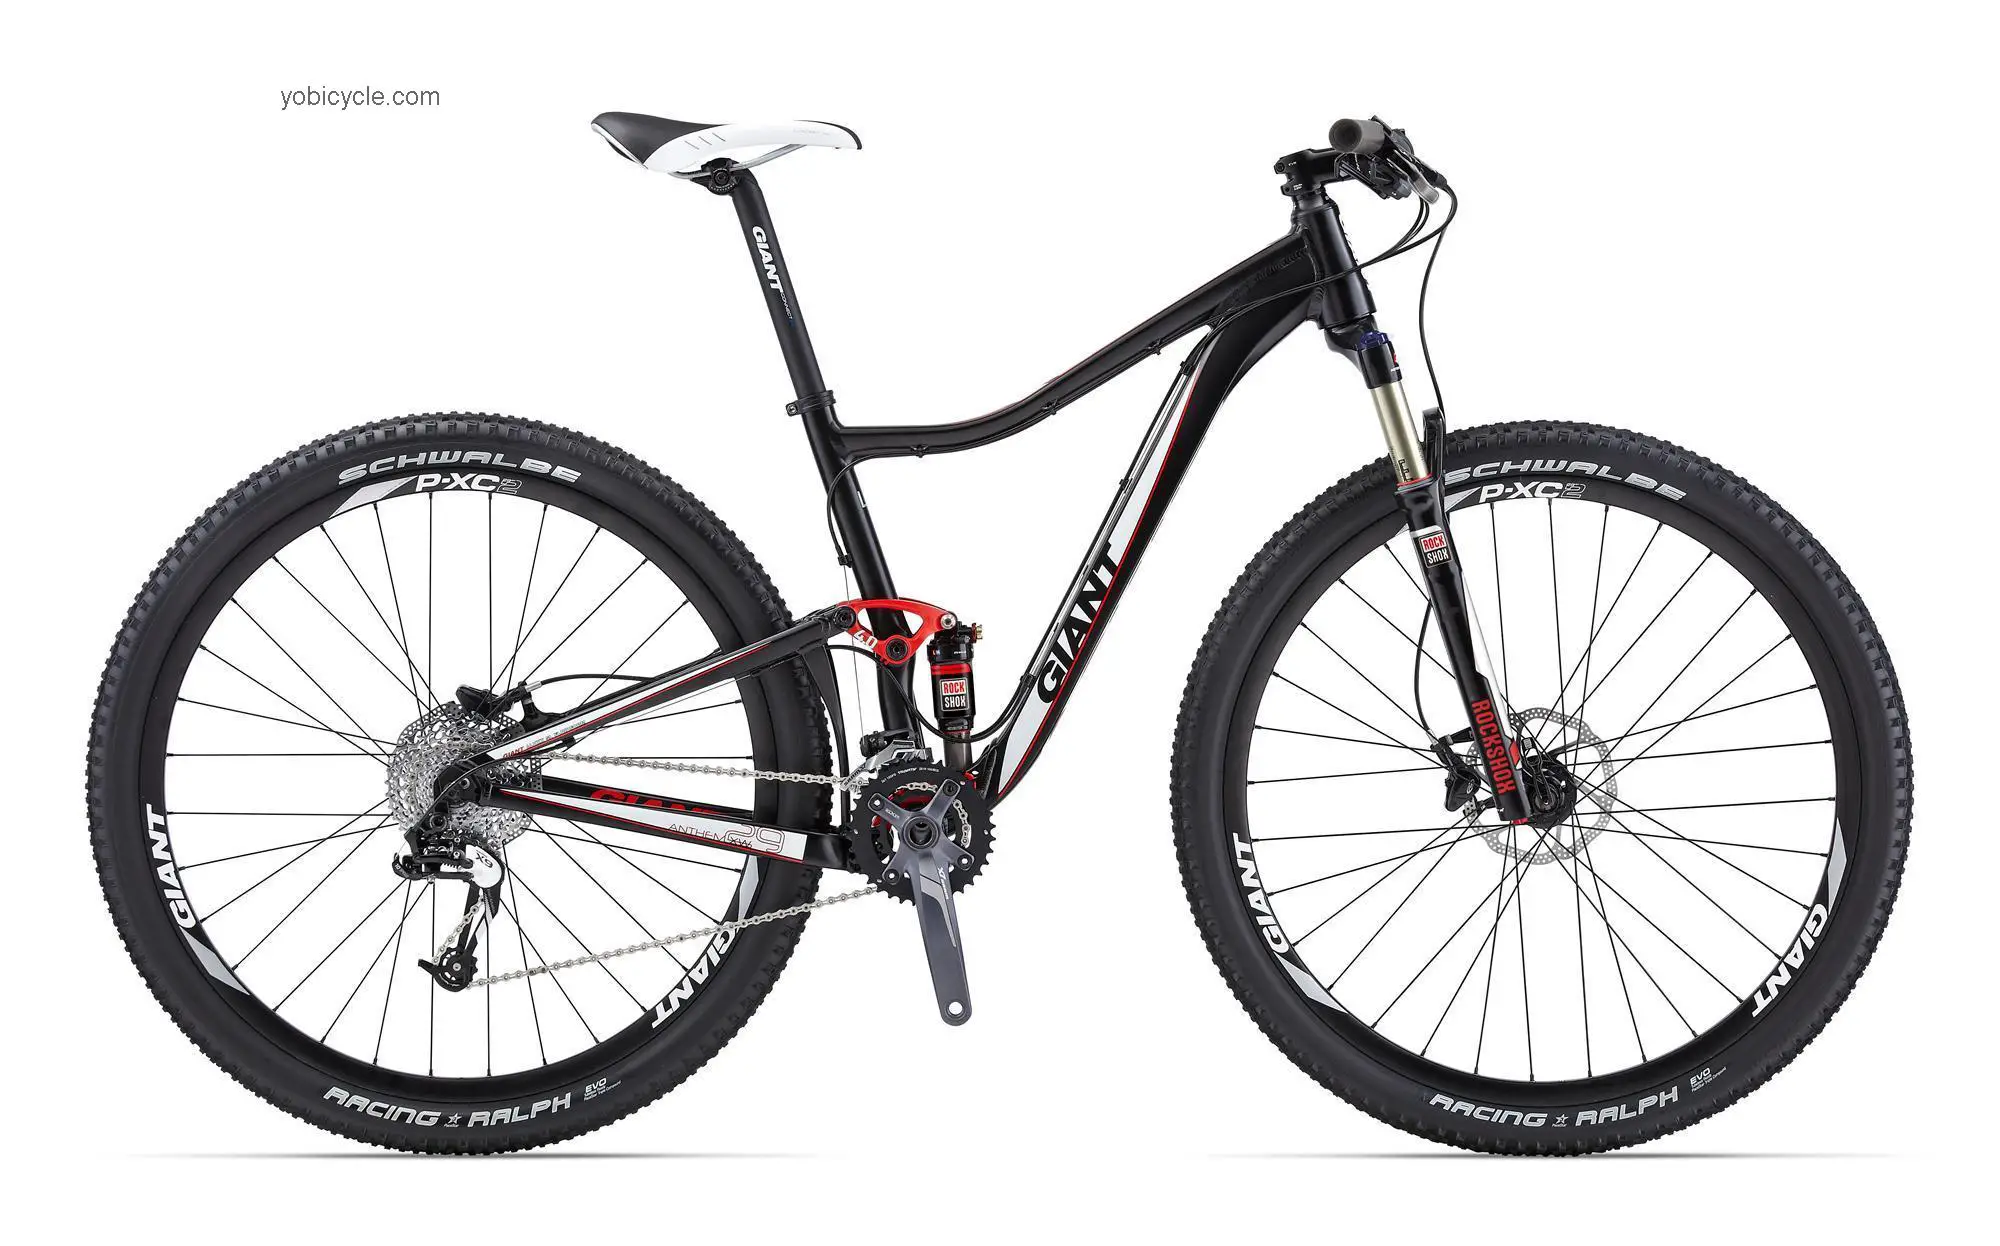 Giant Anthem X 29er 0 W 2013 comparison online with competitors